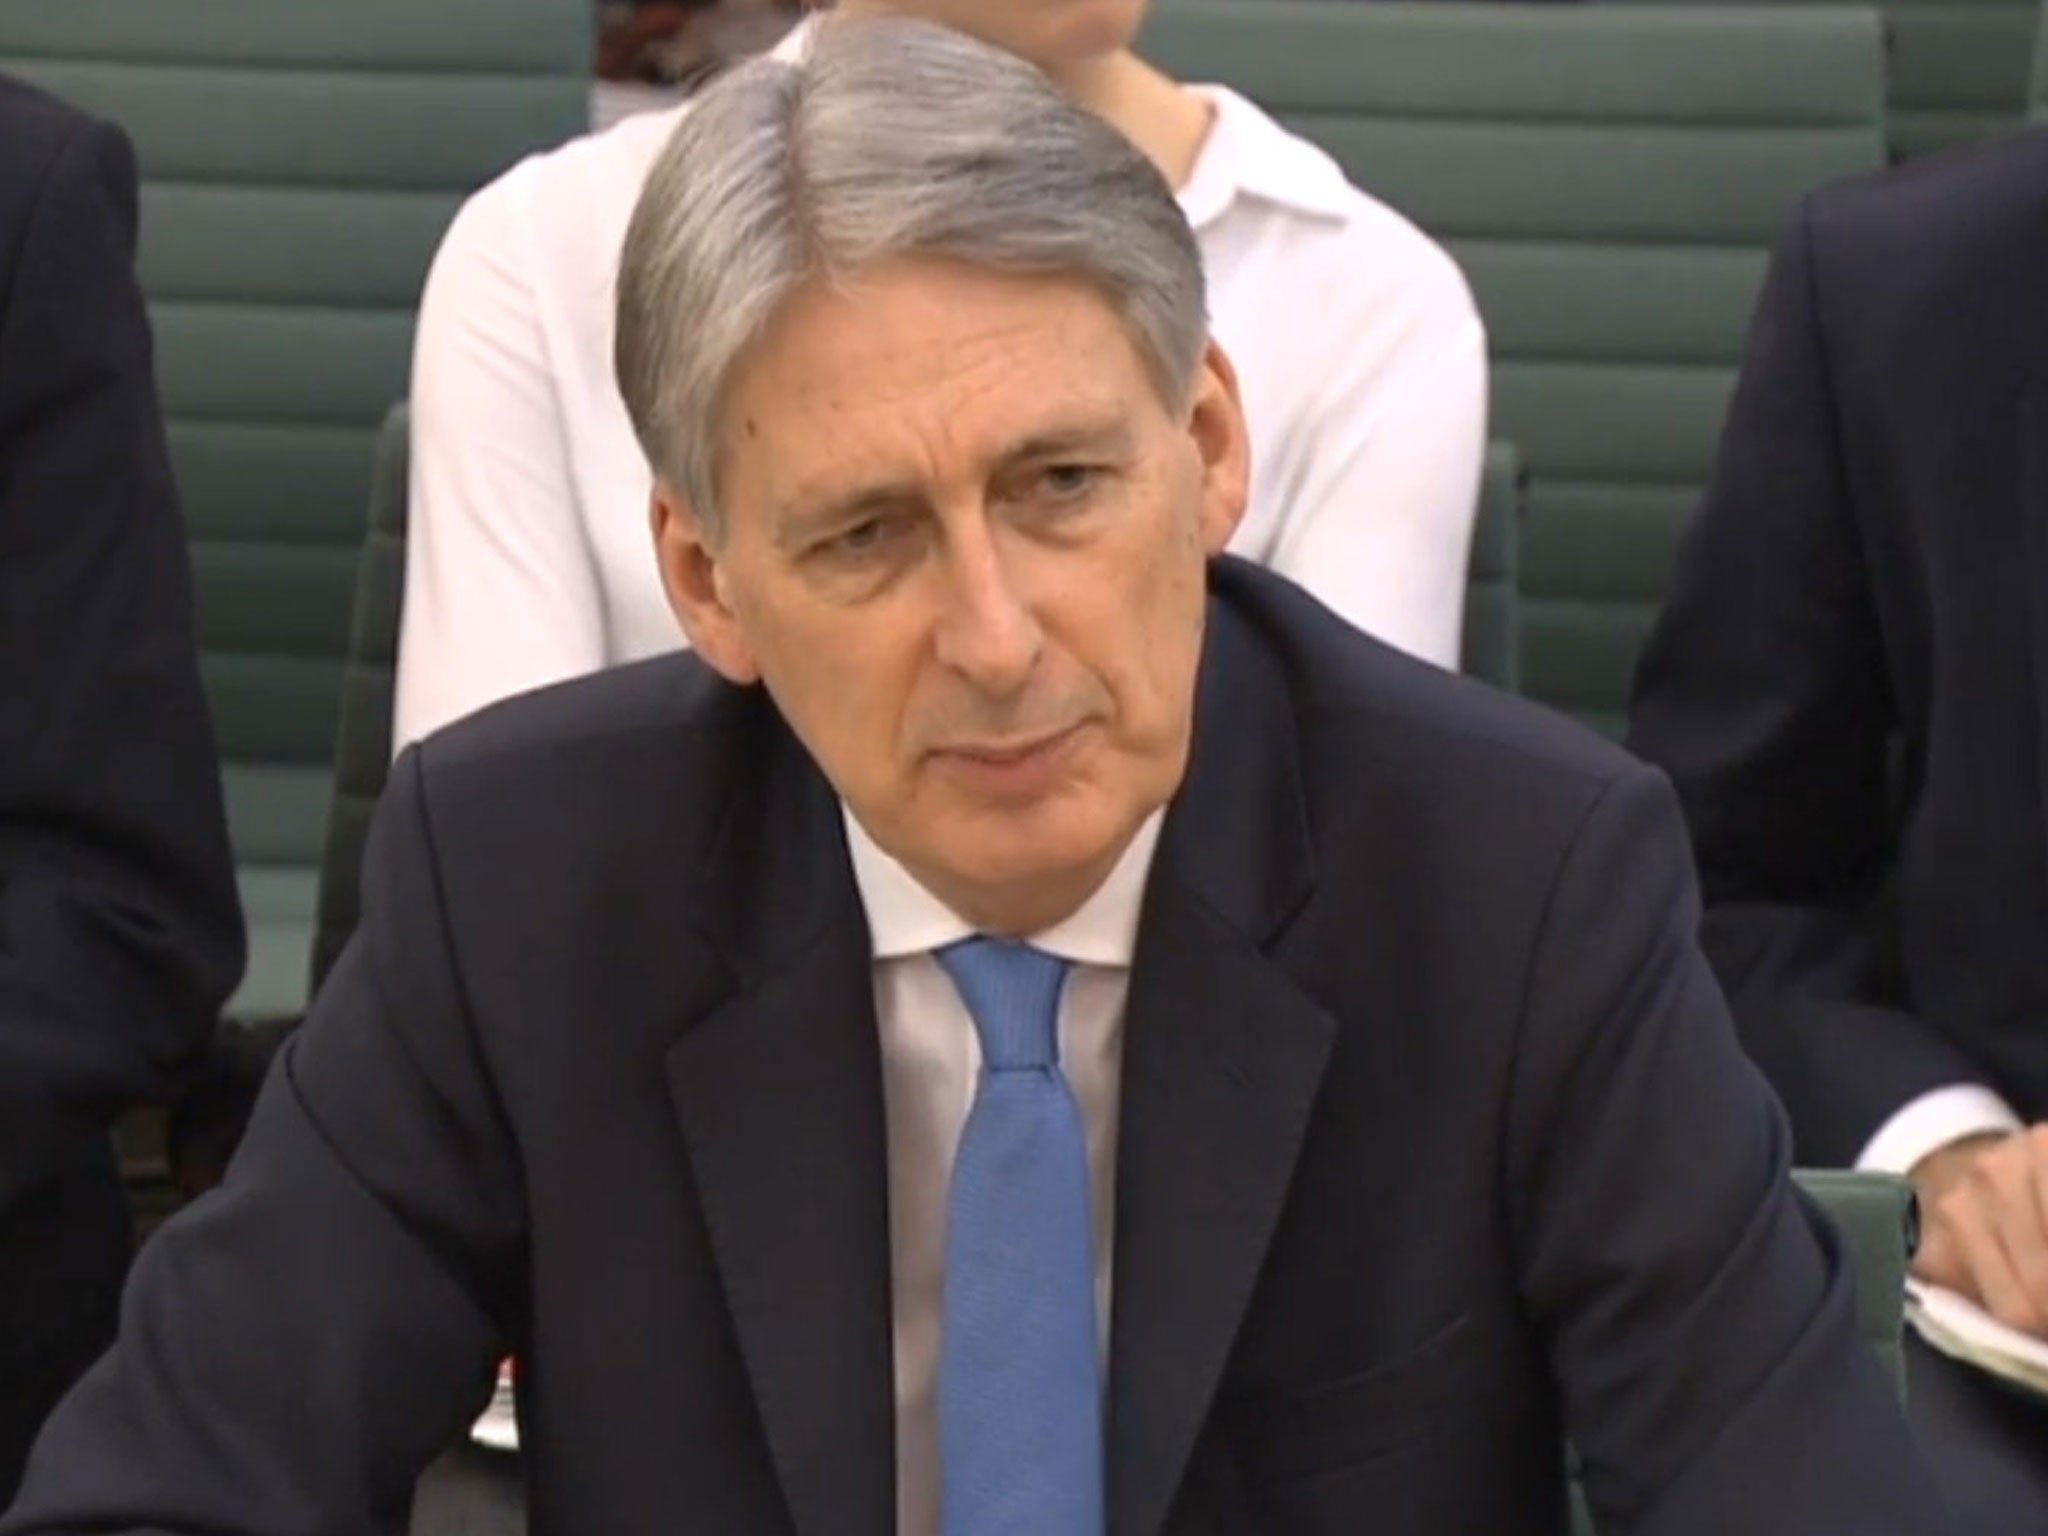 Philip Hammond answering questions in front of the Treasury Select Committee